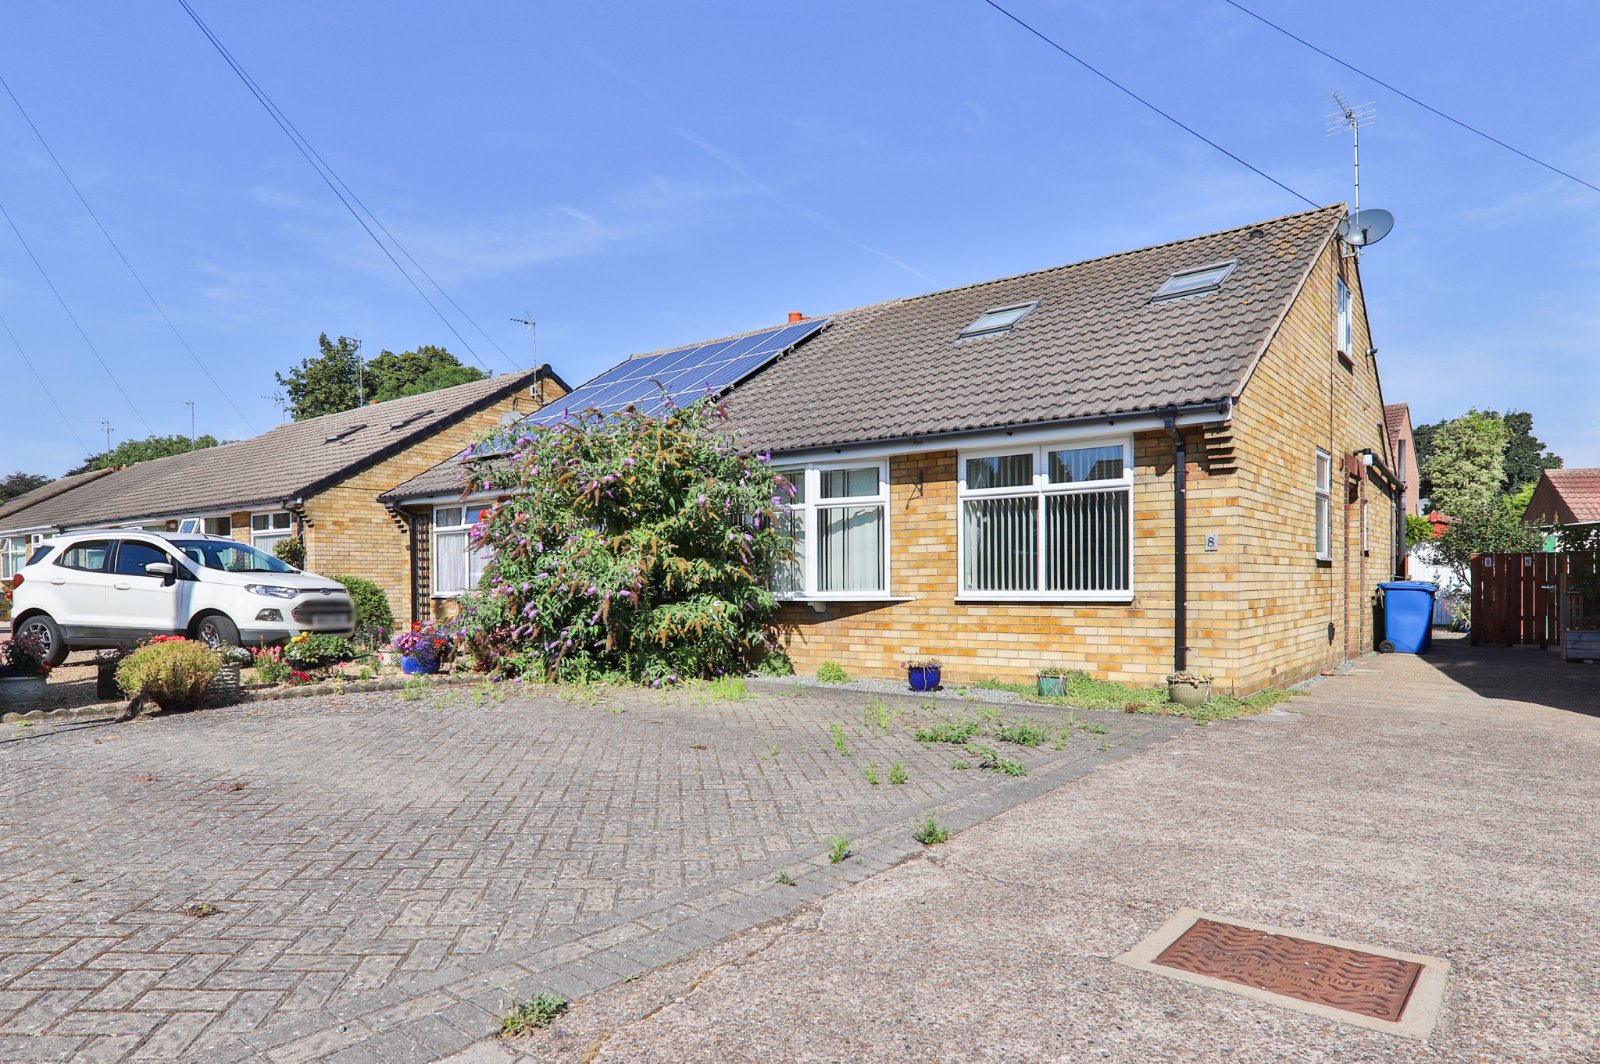 3 bed bungalow for sale in Napier Close, Beverley, HU17